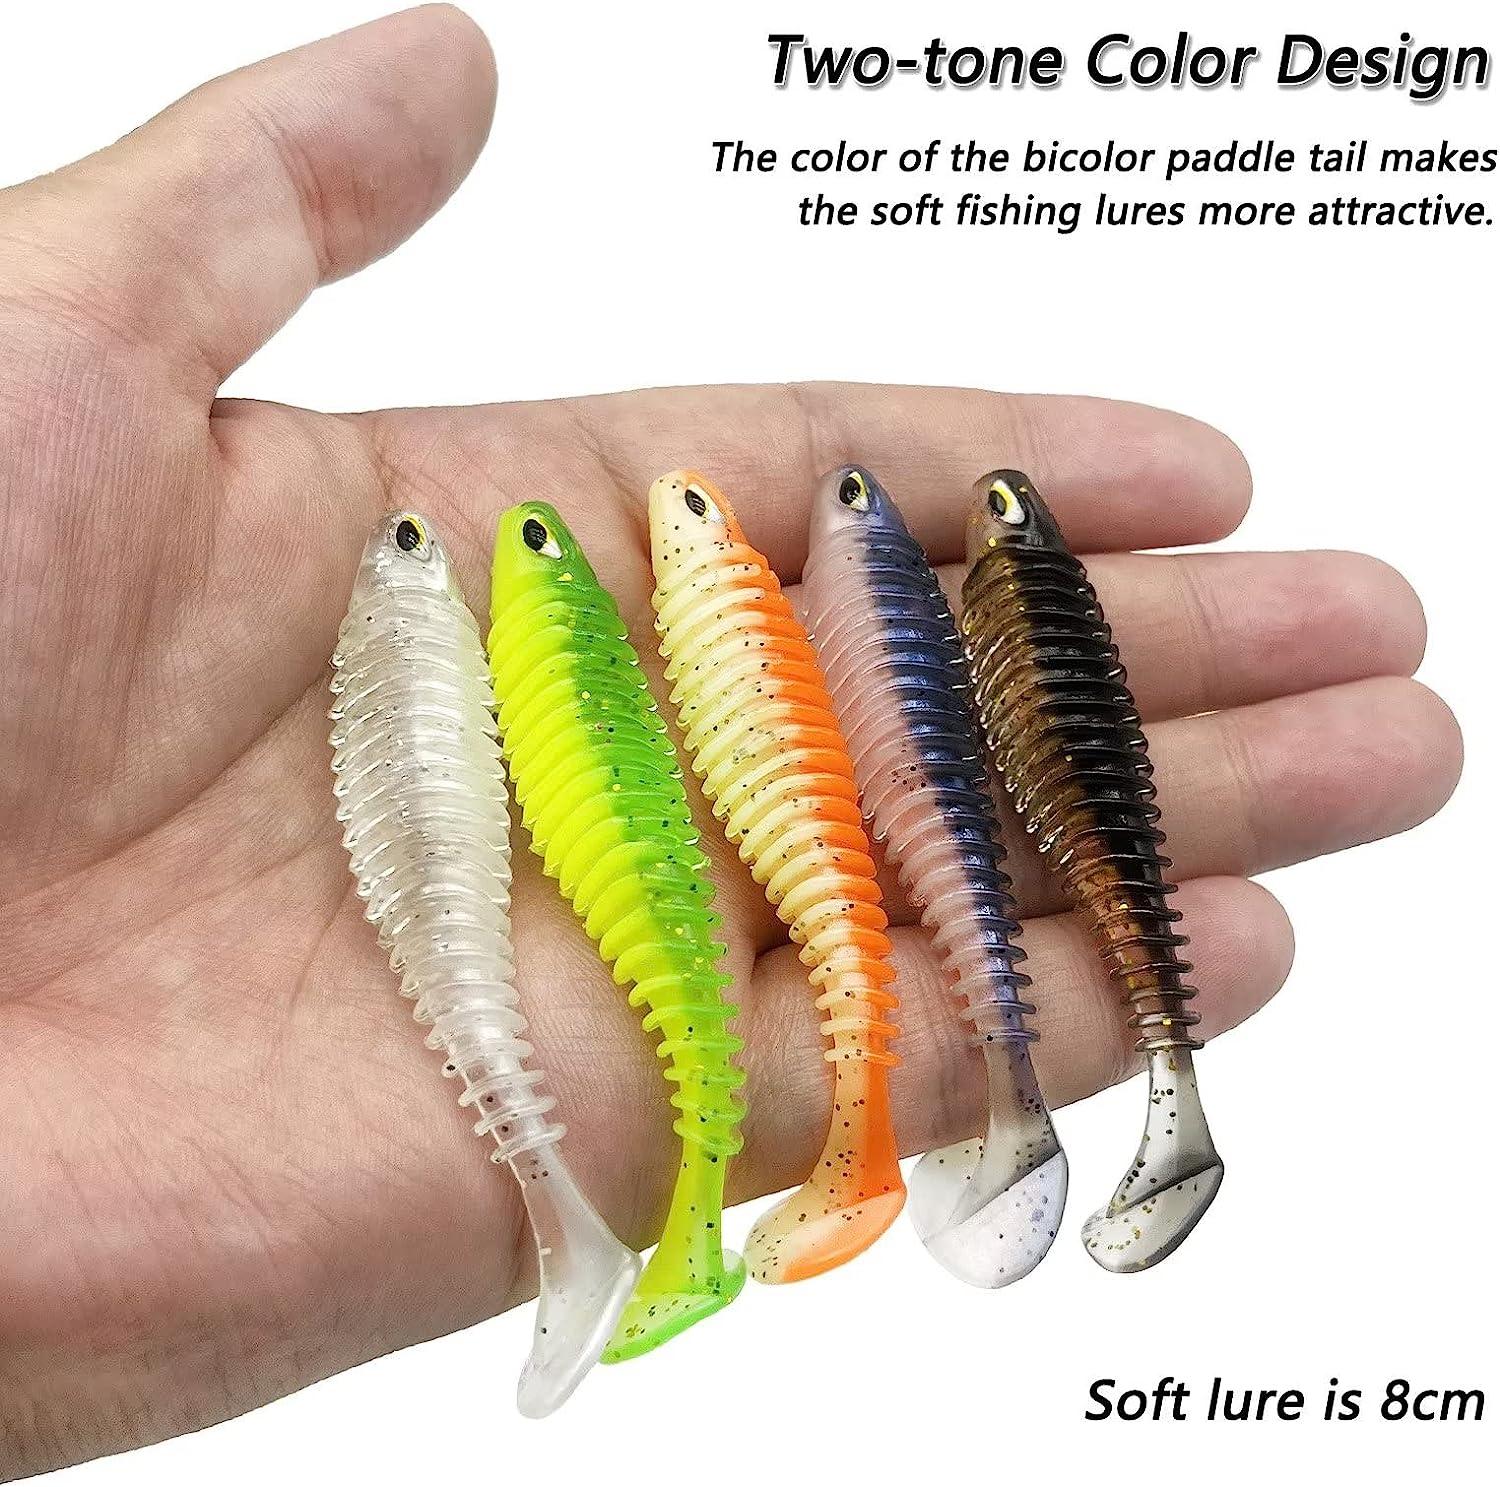 Fishing 6pcs/Lot Soft Fishing Lure Lifelike Paddle Tail Minnow Fishing  Baits Tackle for Saltwater and Freshwater Bass Crappie Walleye or Trout  Lures 55mm 75mm 100mm